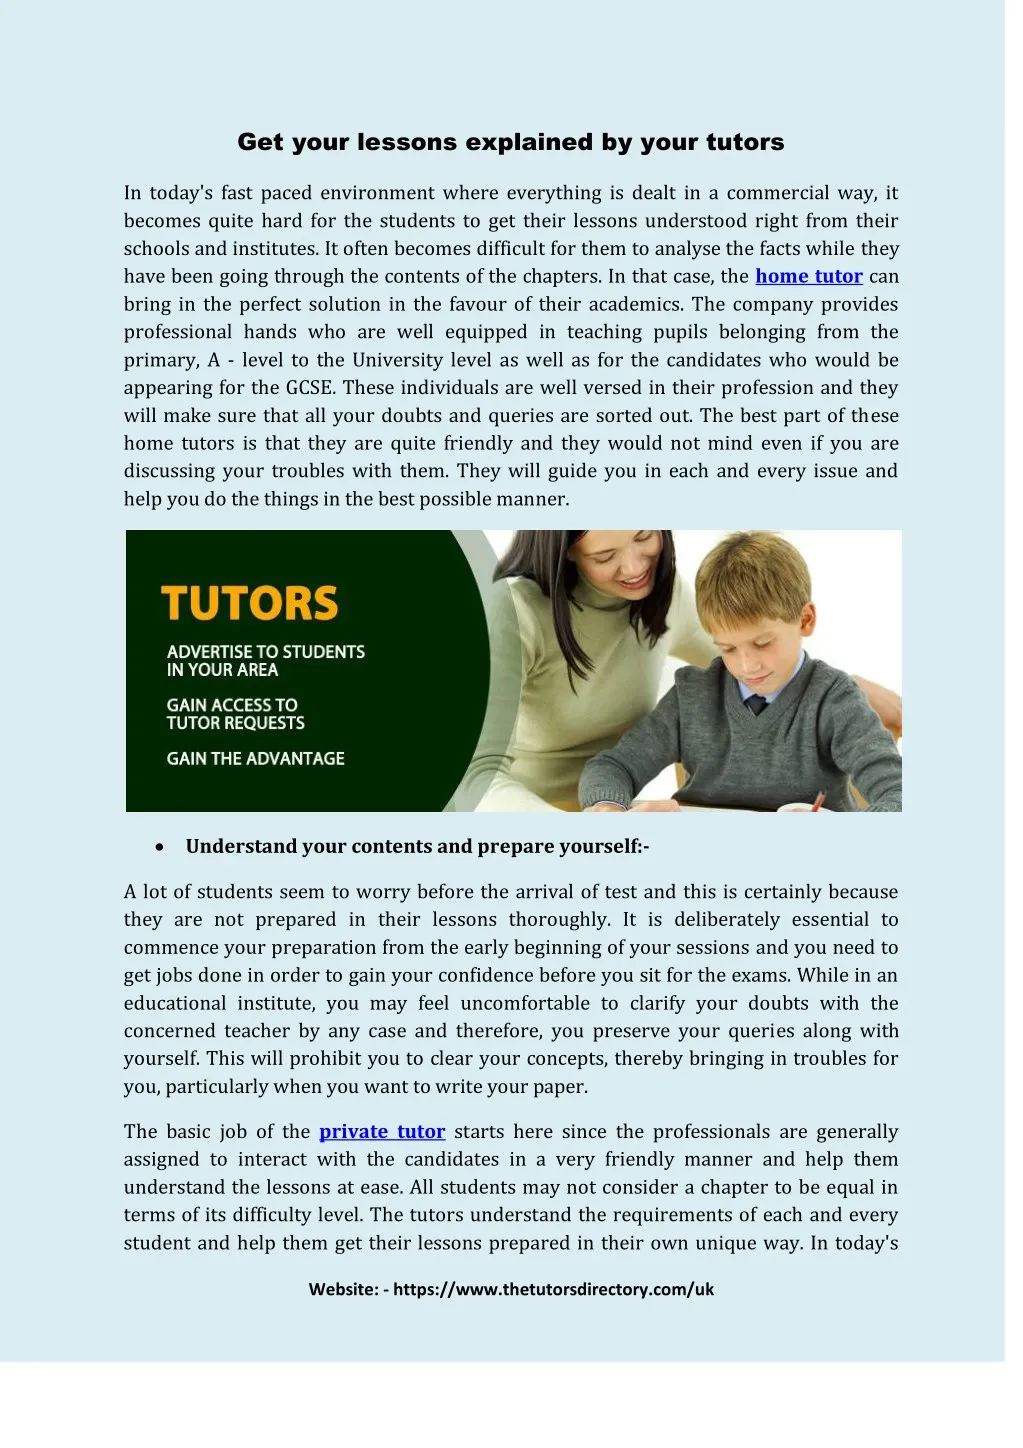 get your lessons explained by your tutors